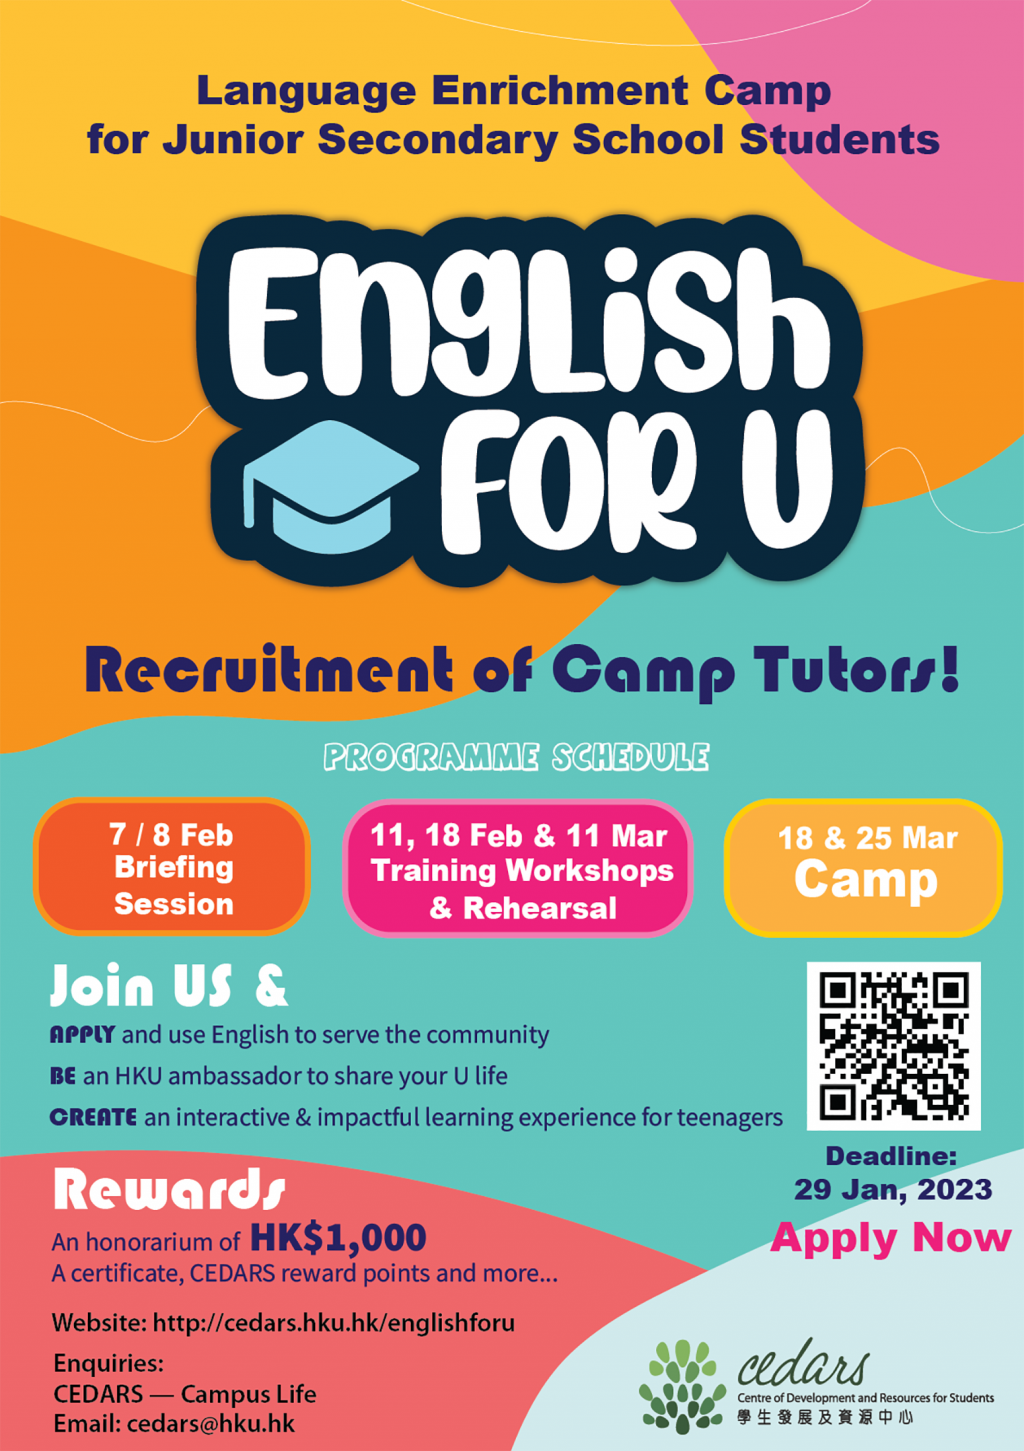 Apply Now!! Recruitment of Camp Tutors for CEDARS' English For 